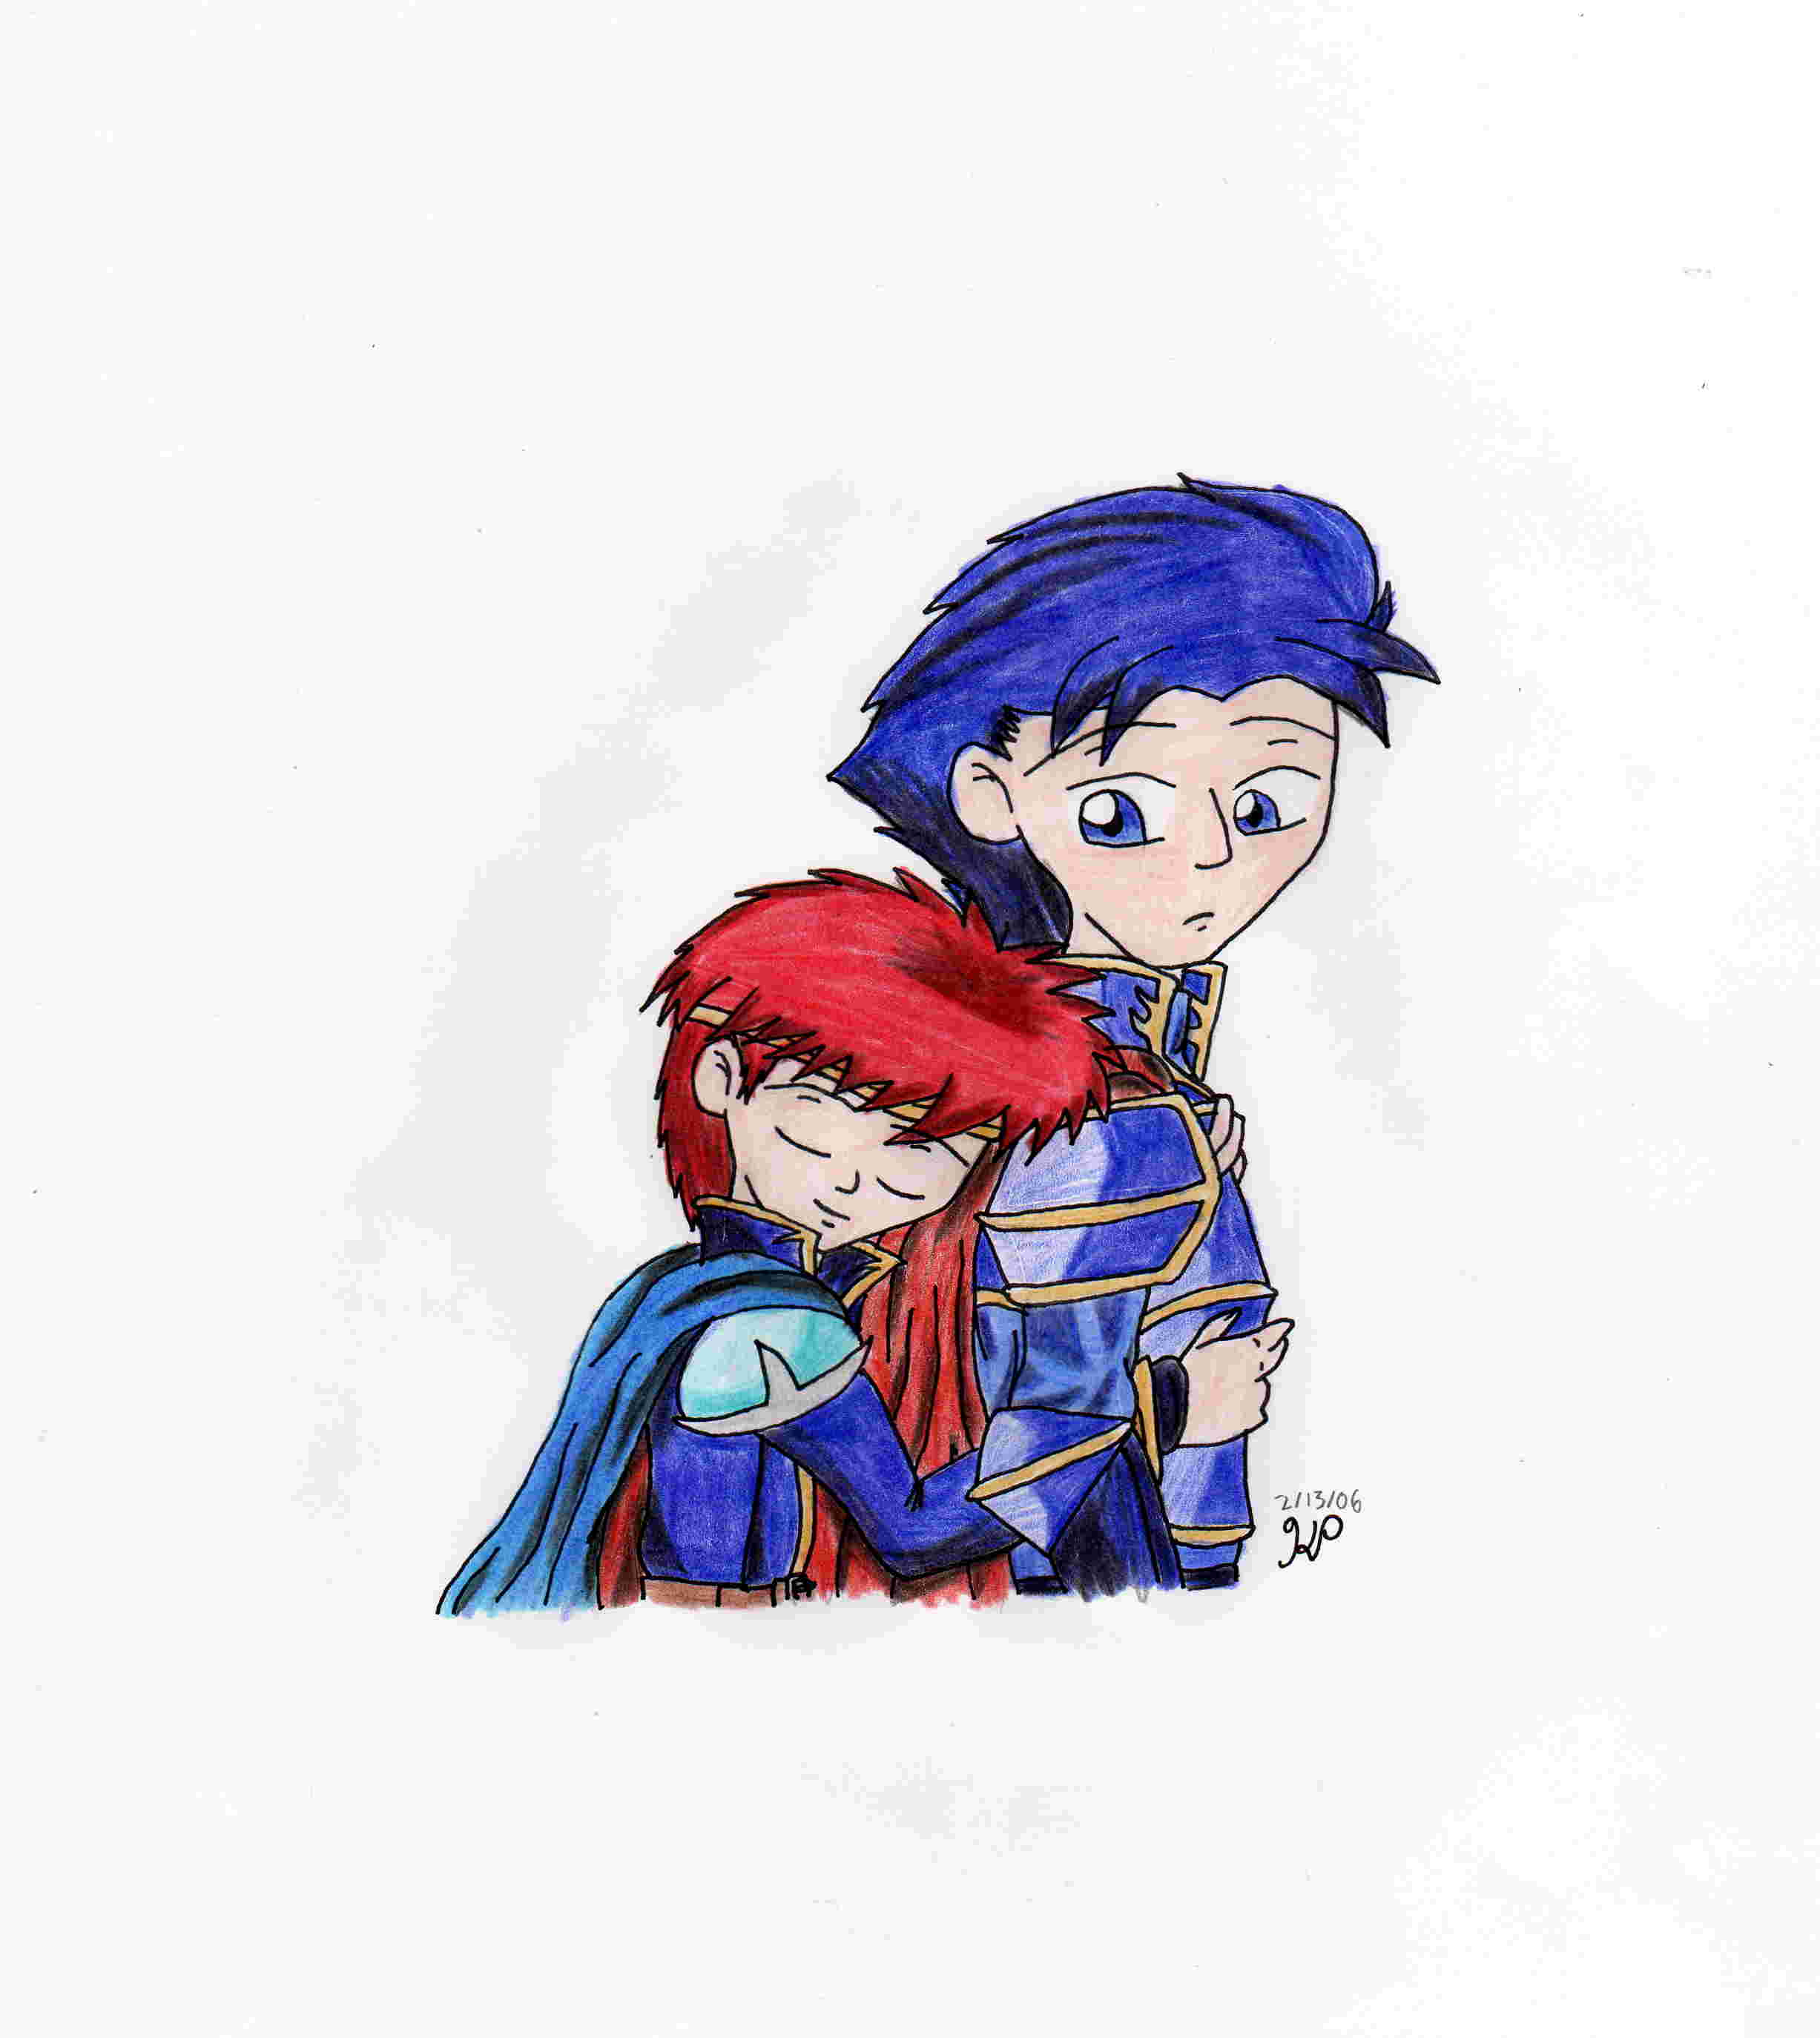 Eliwood and Hector by Nintendo_Nut